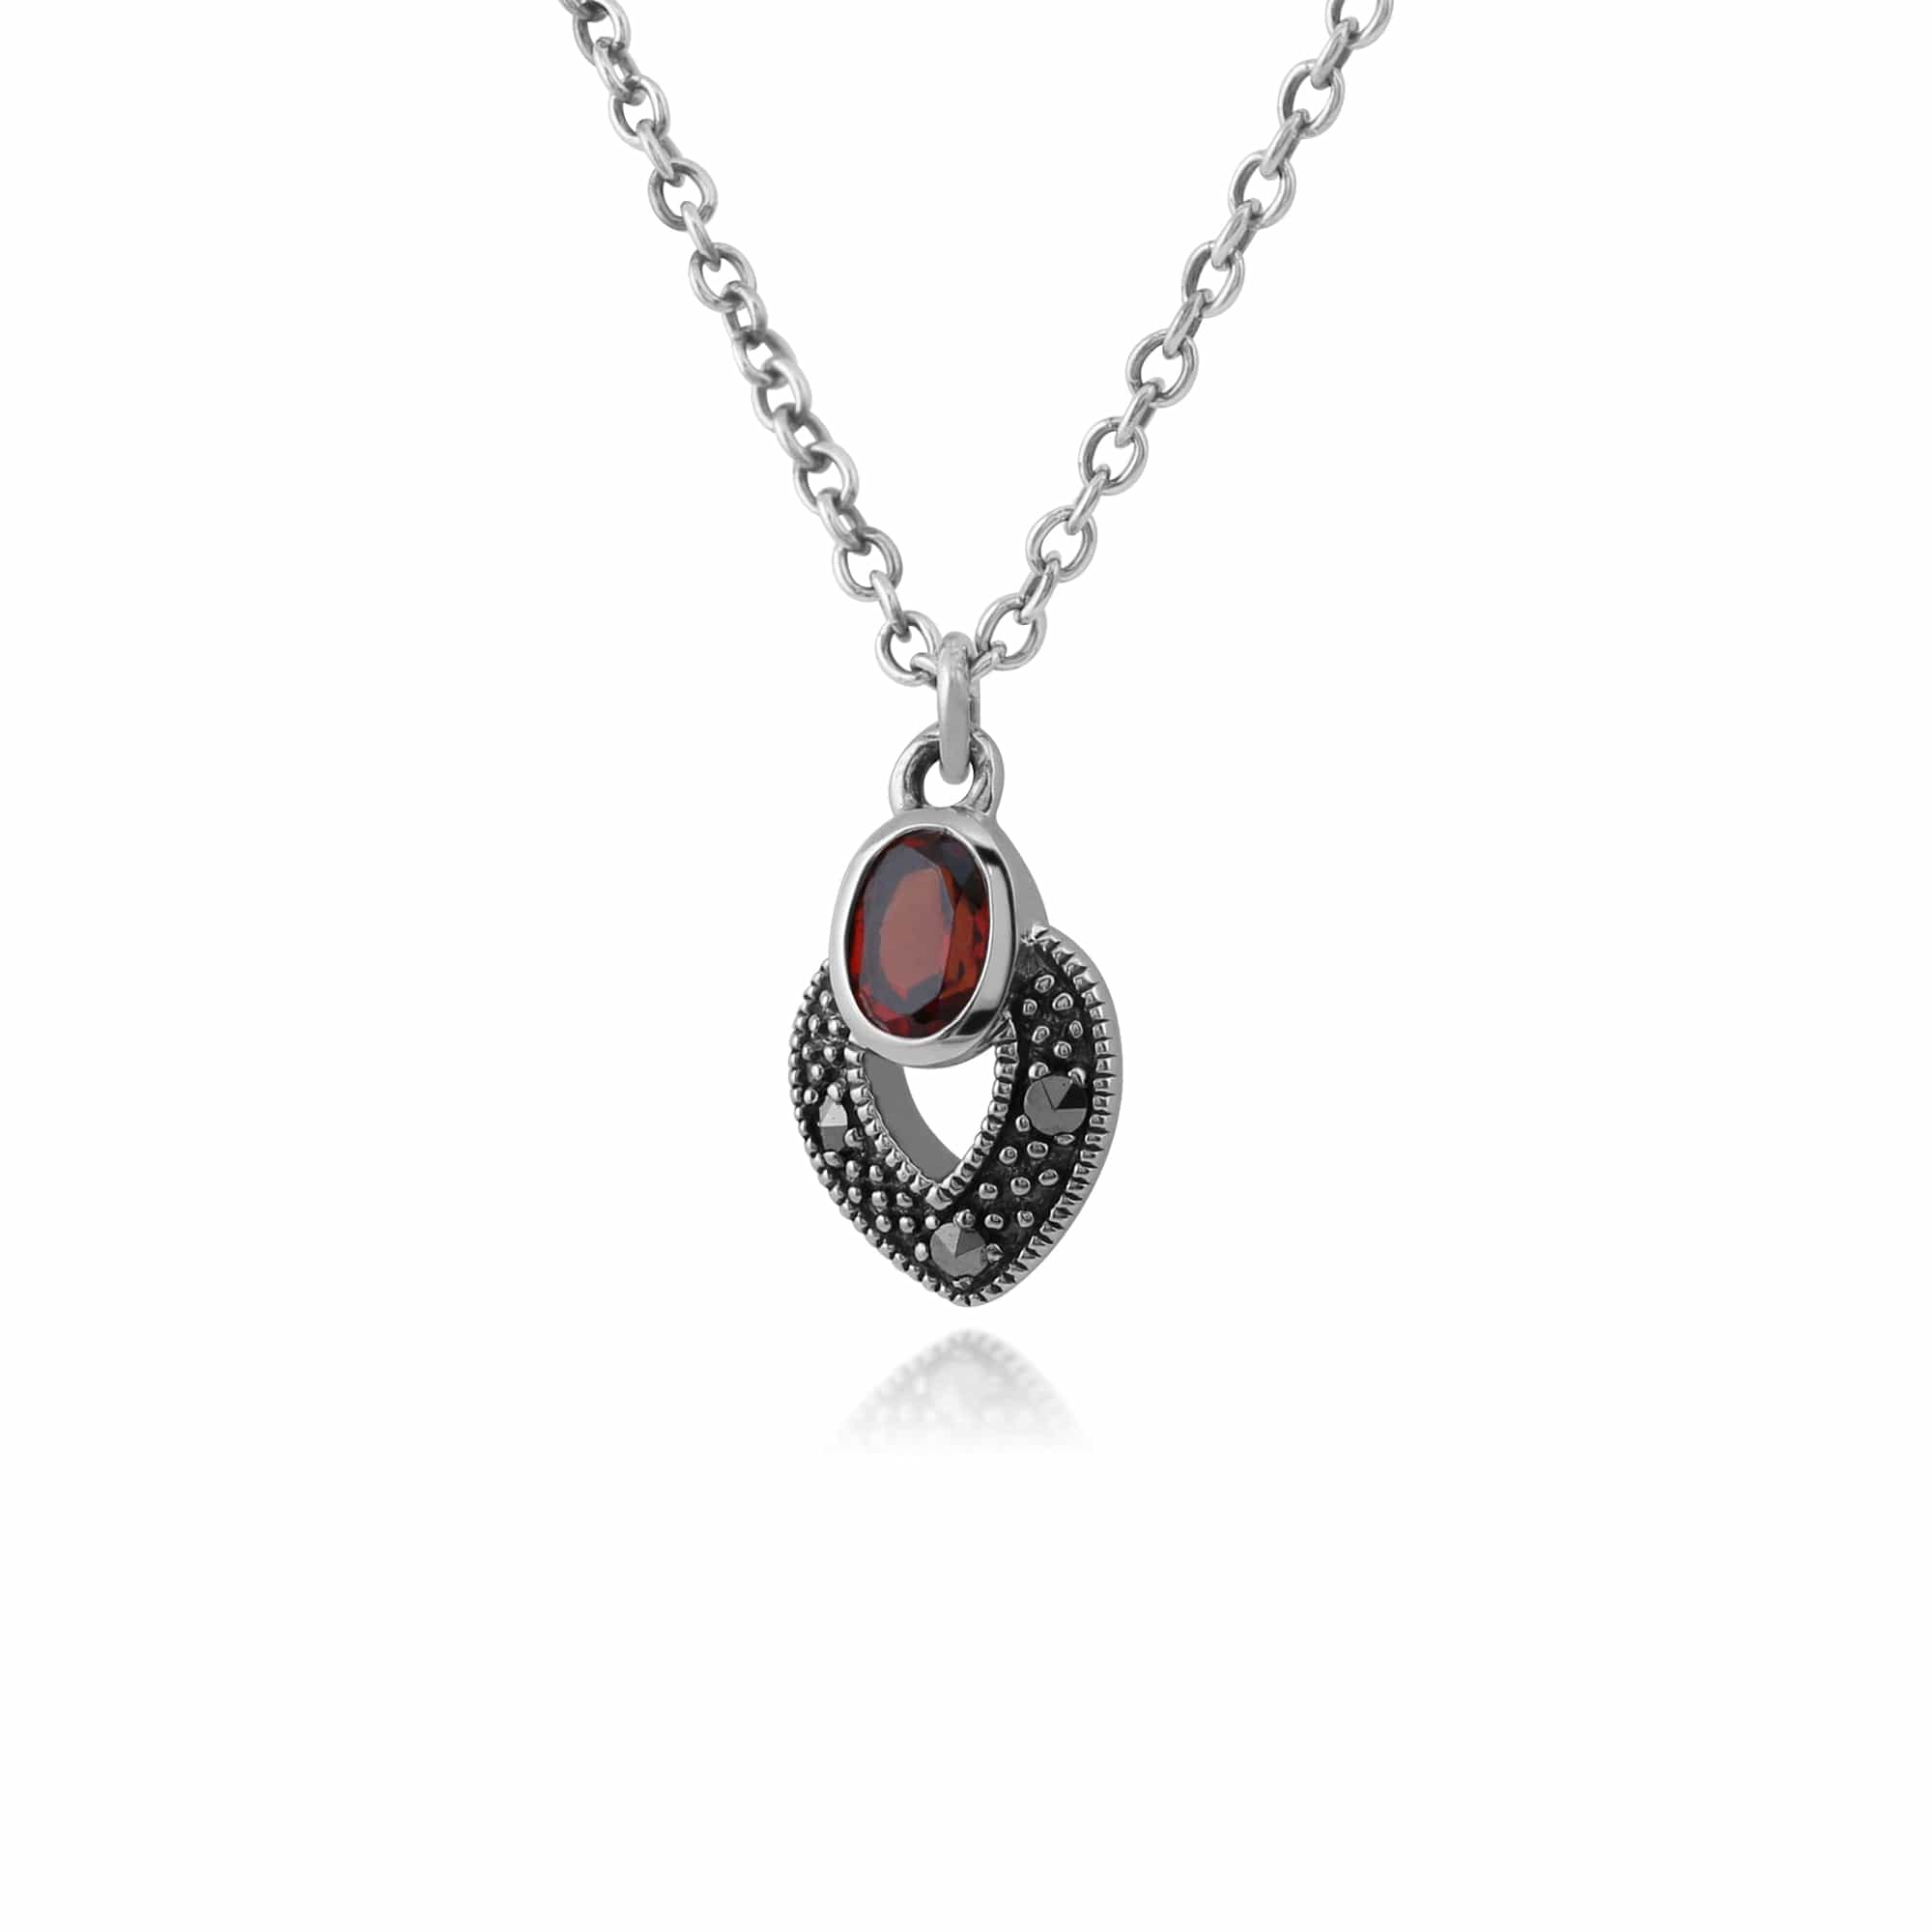 214N688203925 Art Deco Style Oval Garnet & Marcasite Necklace in 925 Sterling Silver 2